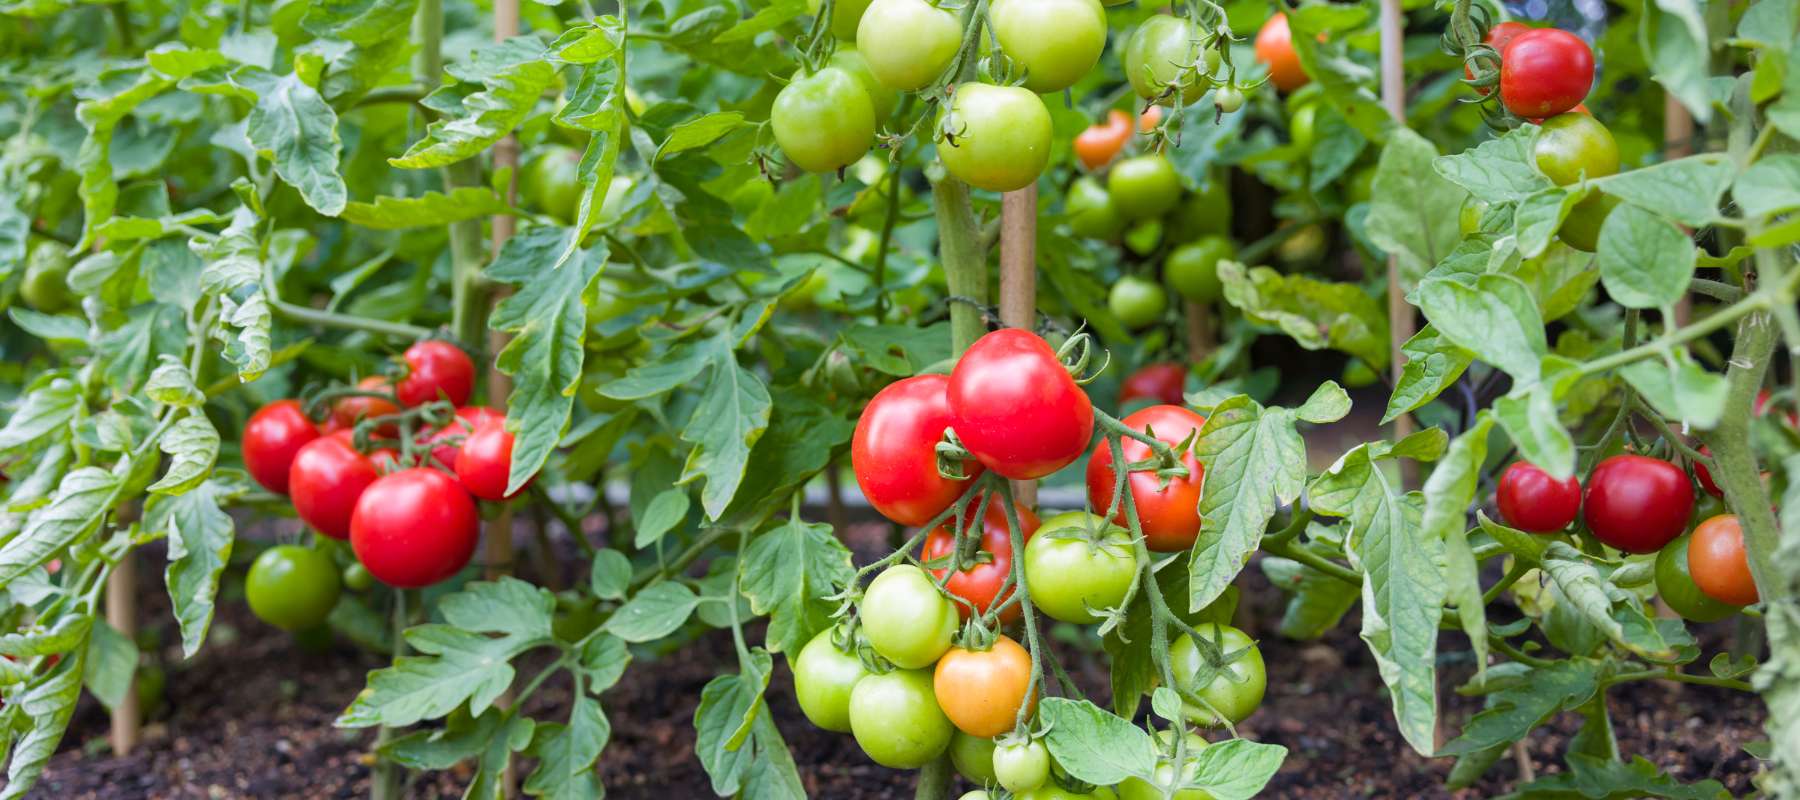 What to know about pruning tomatoes